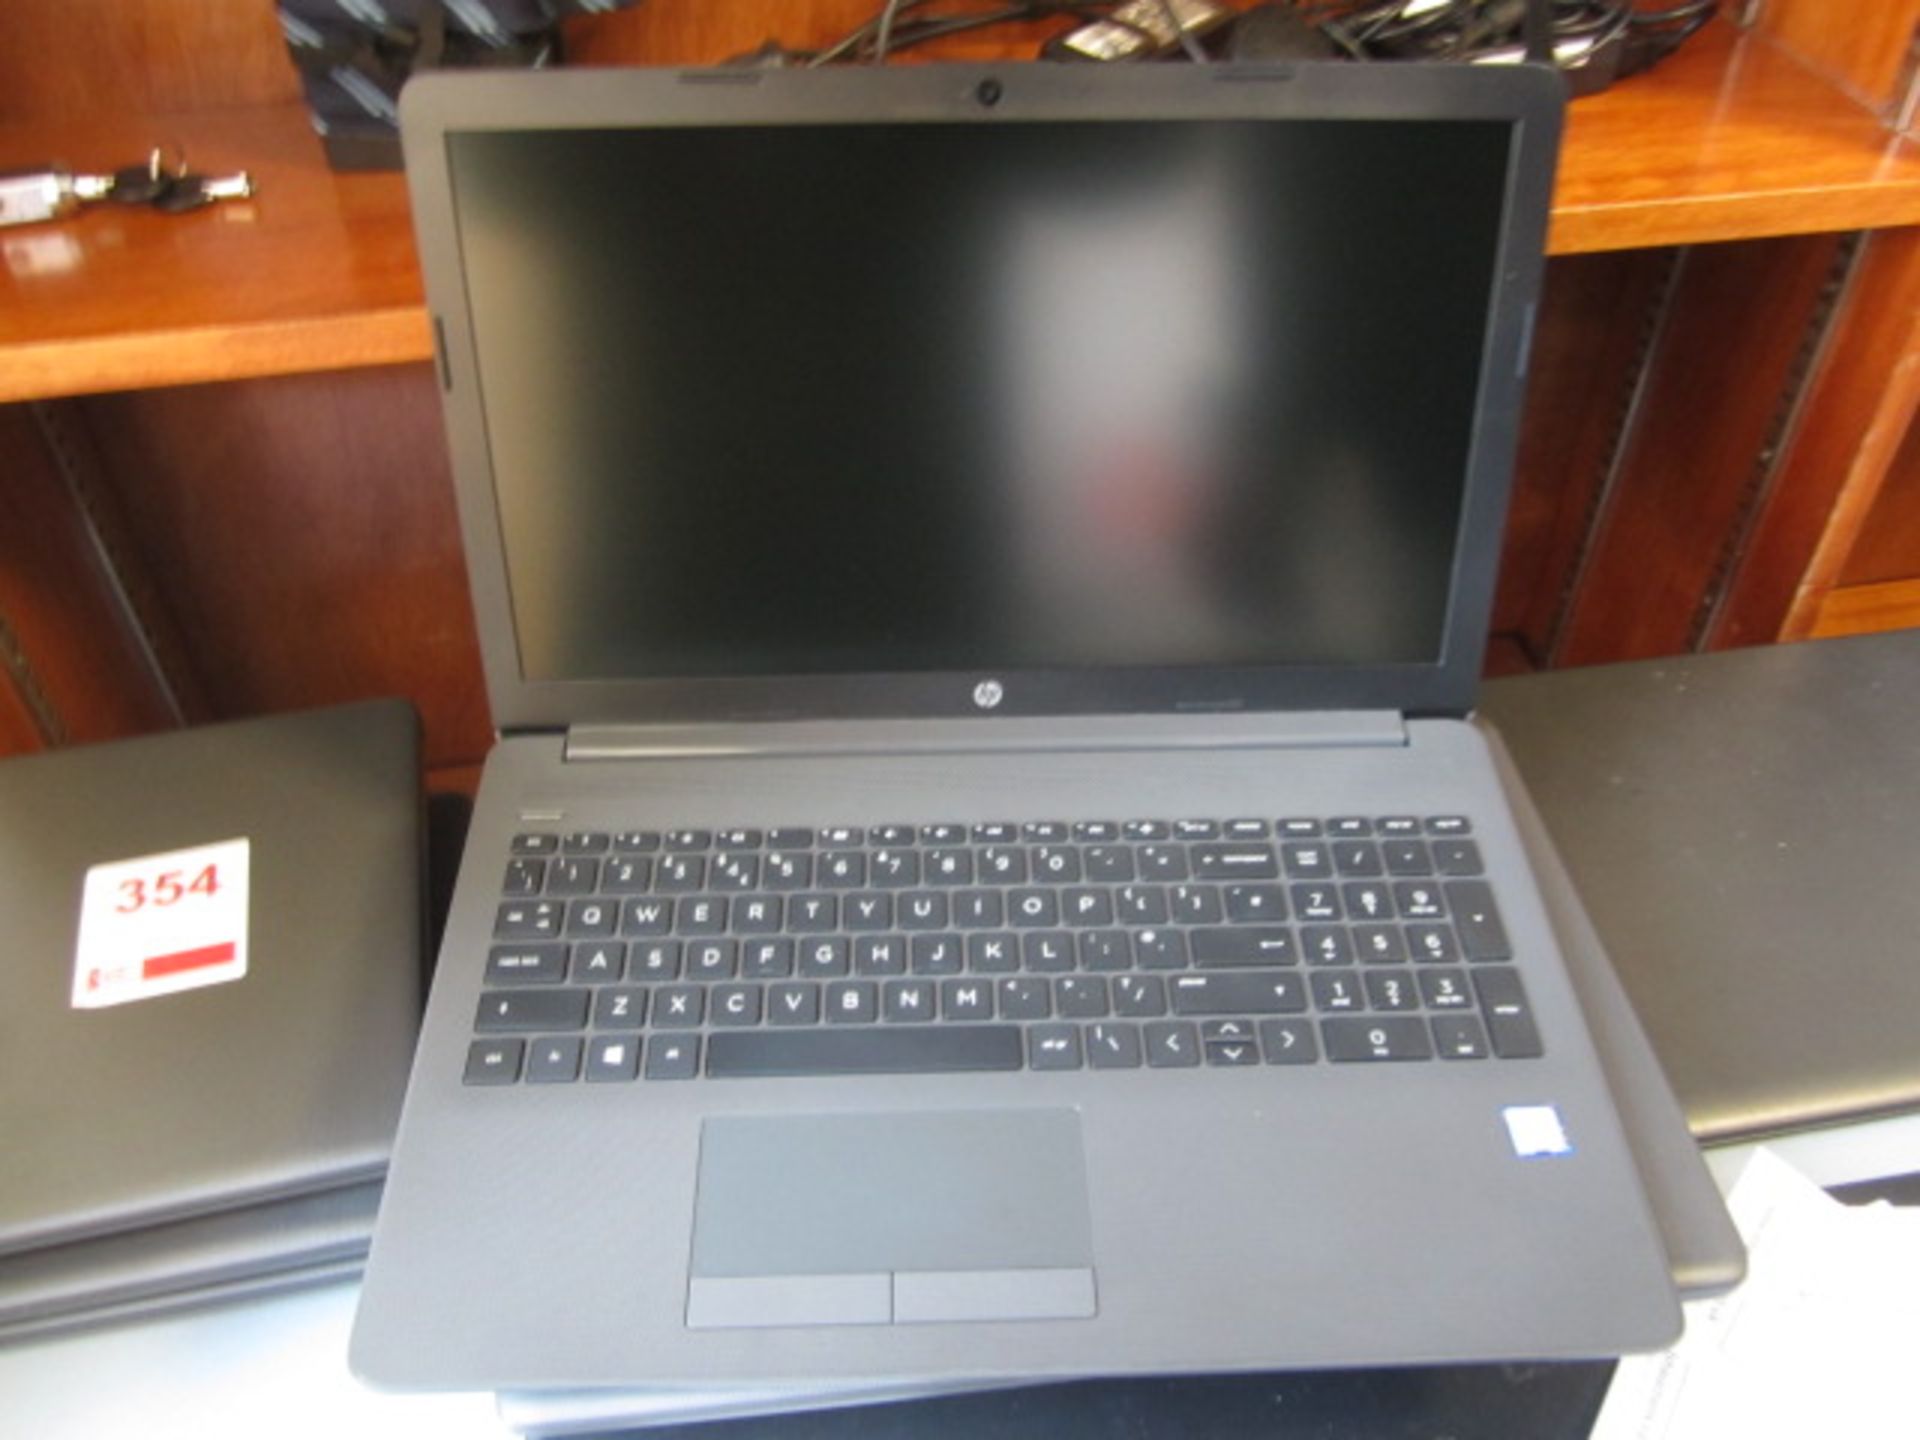 HP 250 G7 Core i3 laptop and case. Located at main schoolPlease note: This lot, for VAT purposes, is